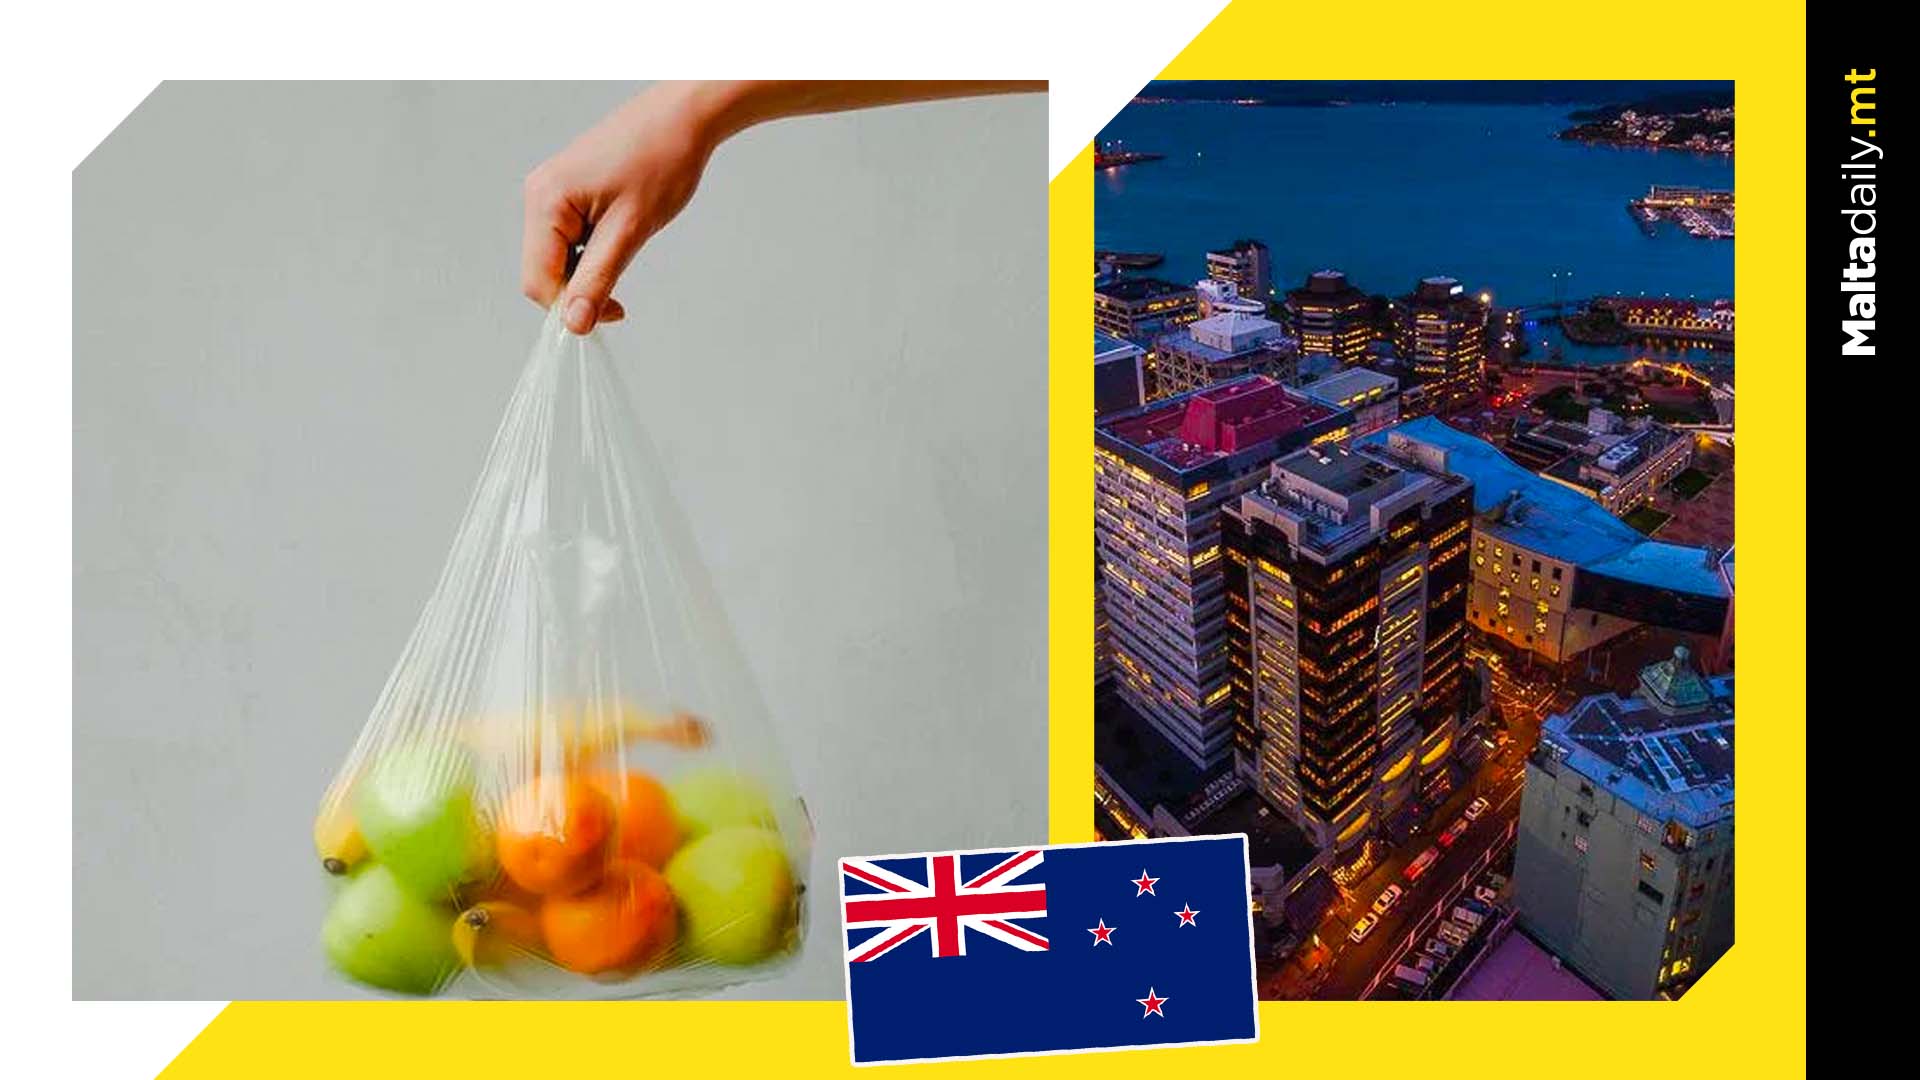 New Zealand bans plastic bags for fresh produce in supermarkets